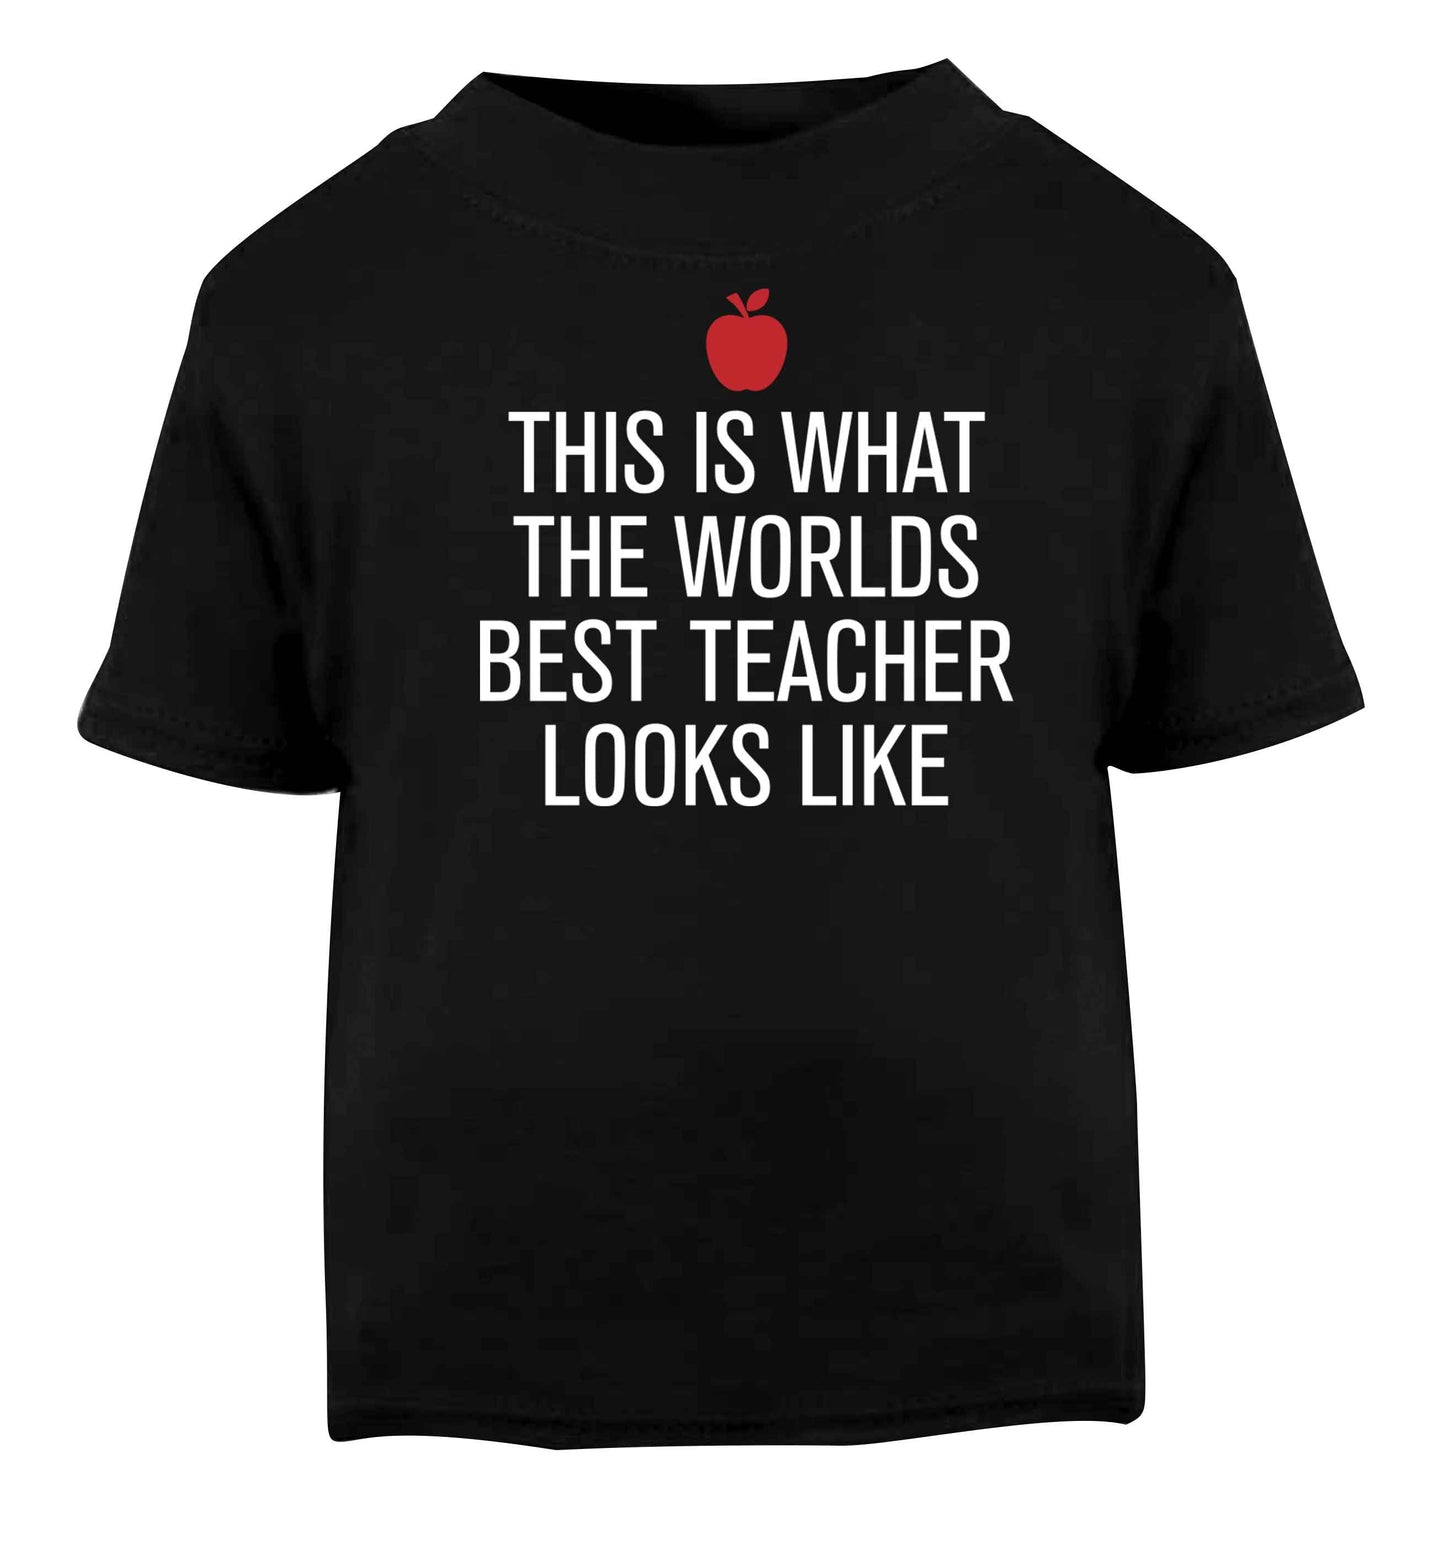 This is what the worlds best teacher looks like Black baby toddler Tshirt 2 years